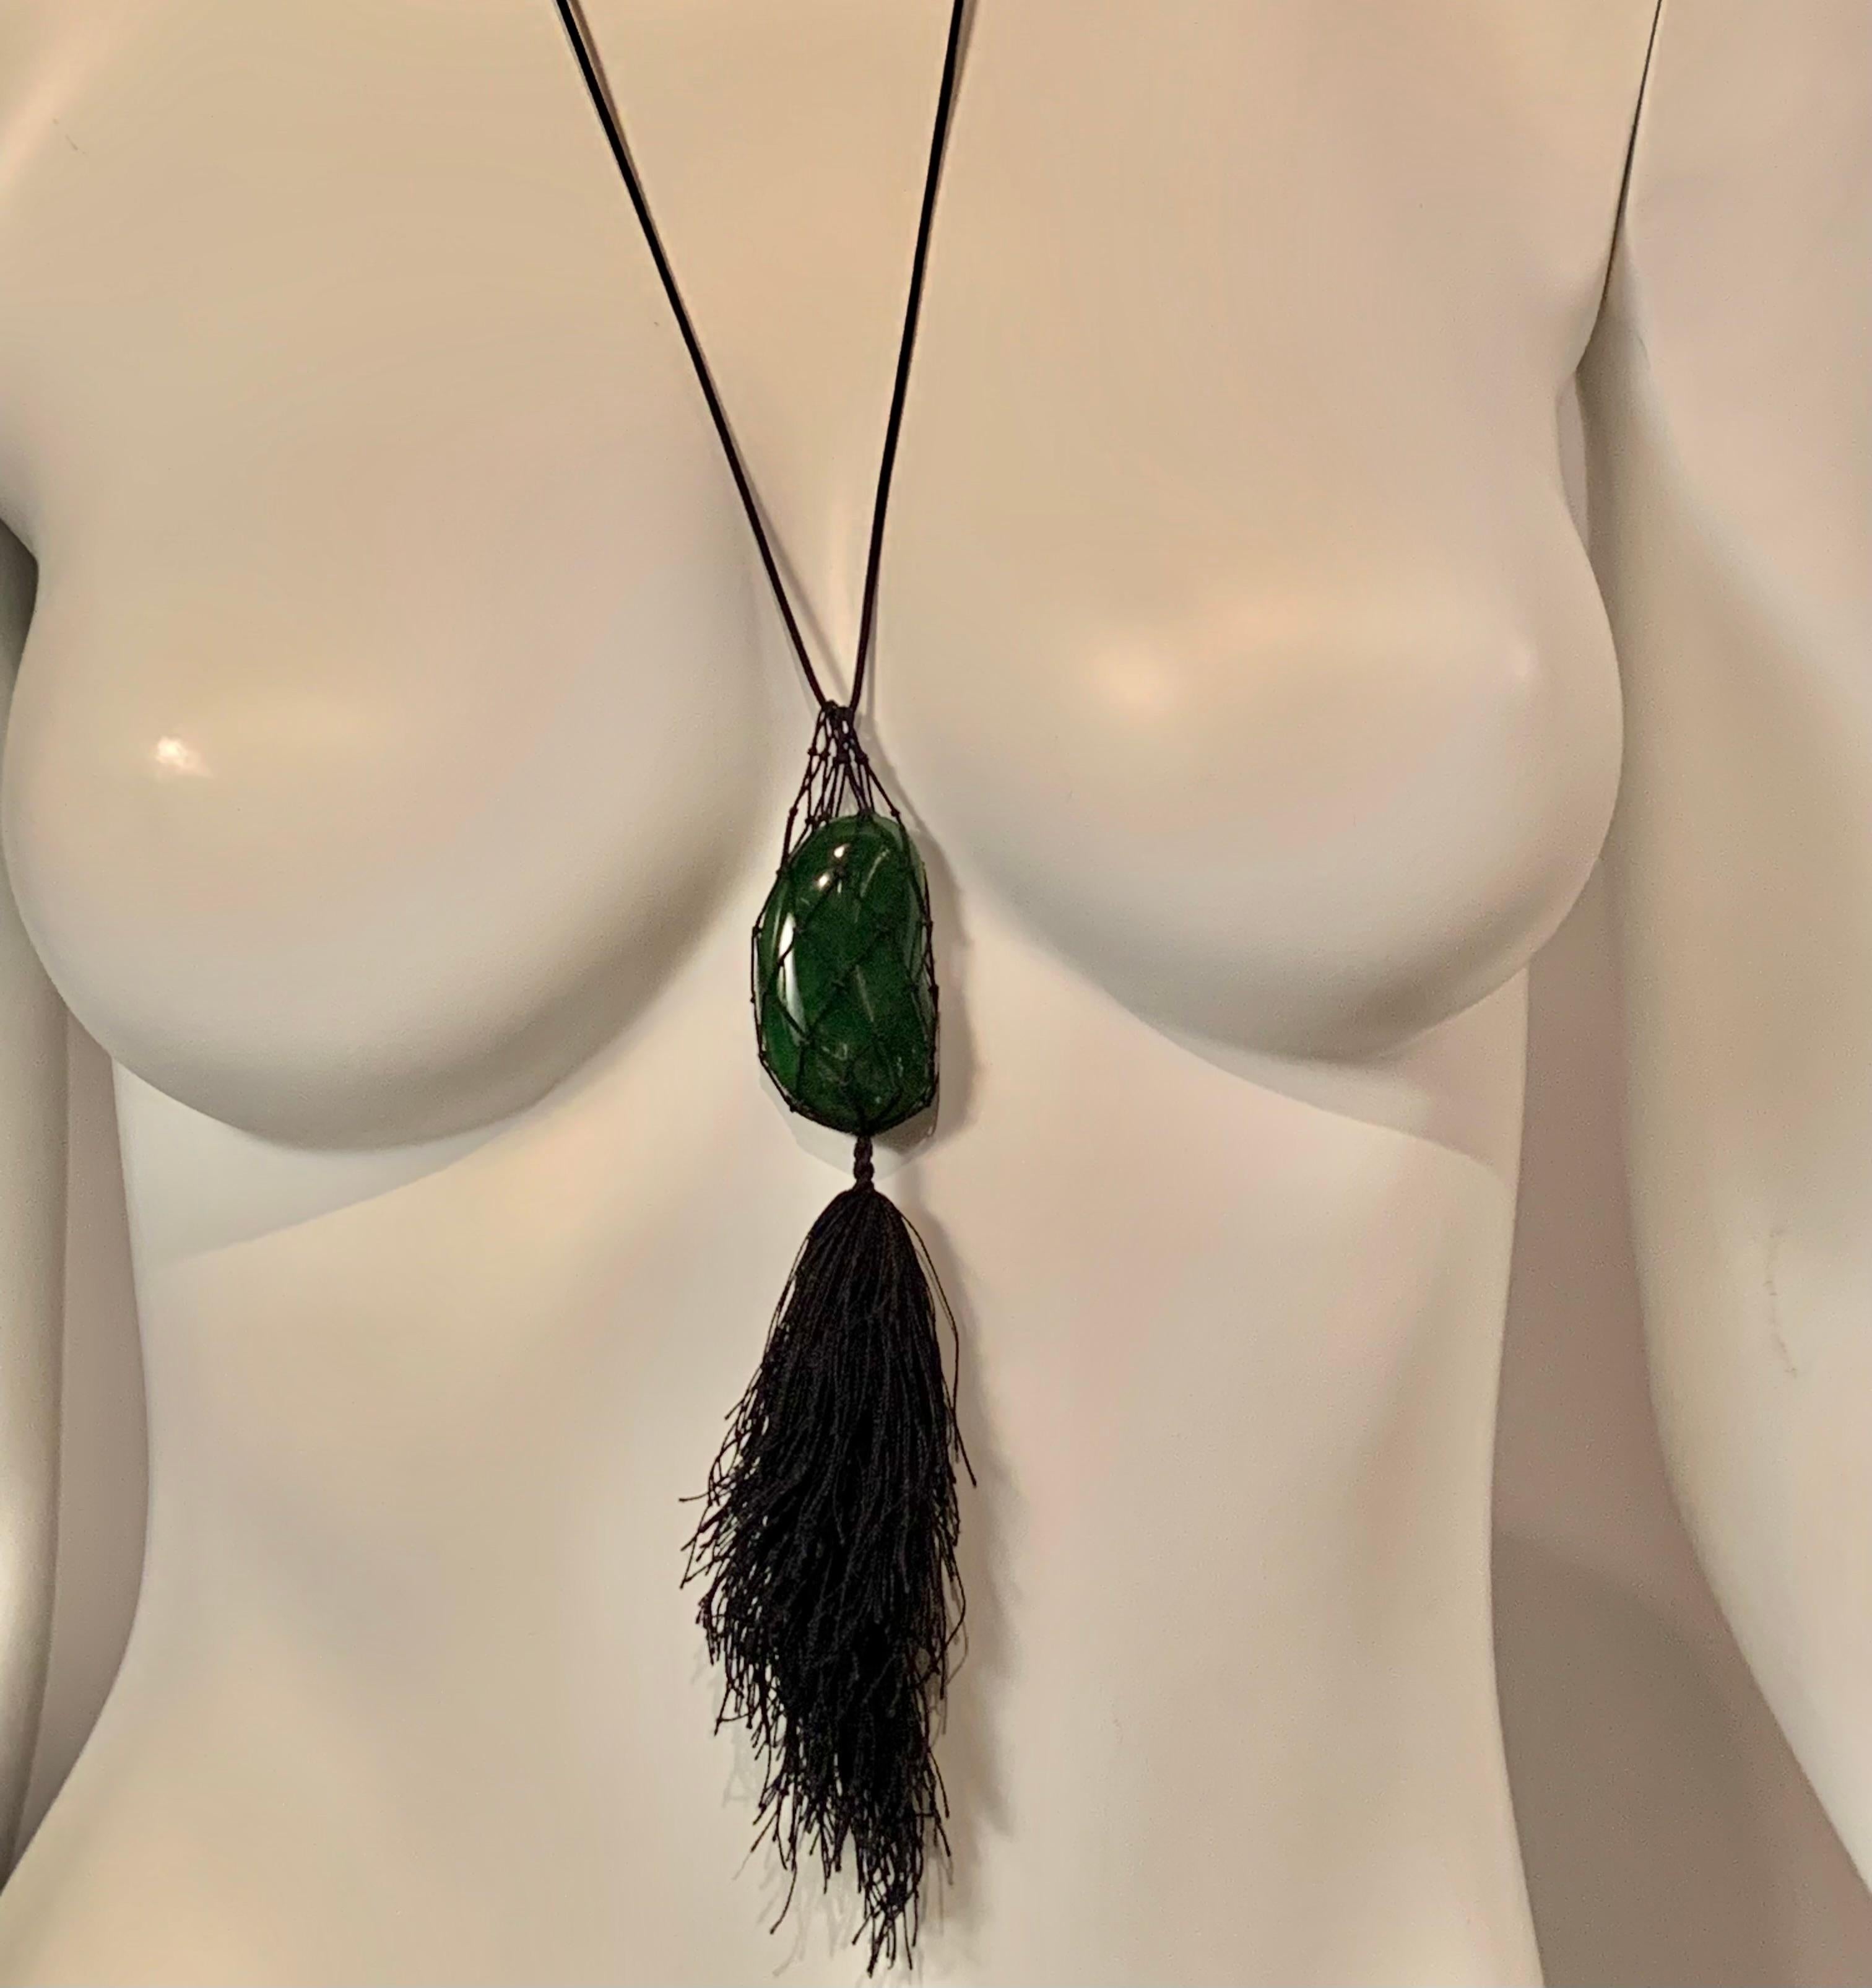 An unusual and extremely rare form for the iconic Elsa Peretti bean, this large jade bean is cradled in a hand woven black mesh bag. A large black tassel is suspended from the bag and a black cord completes the necklace. The silk cord, bag and